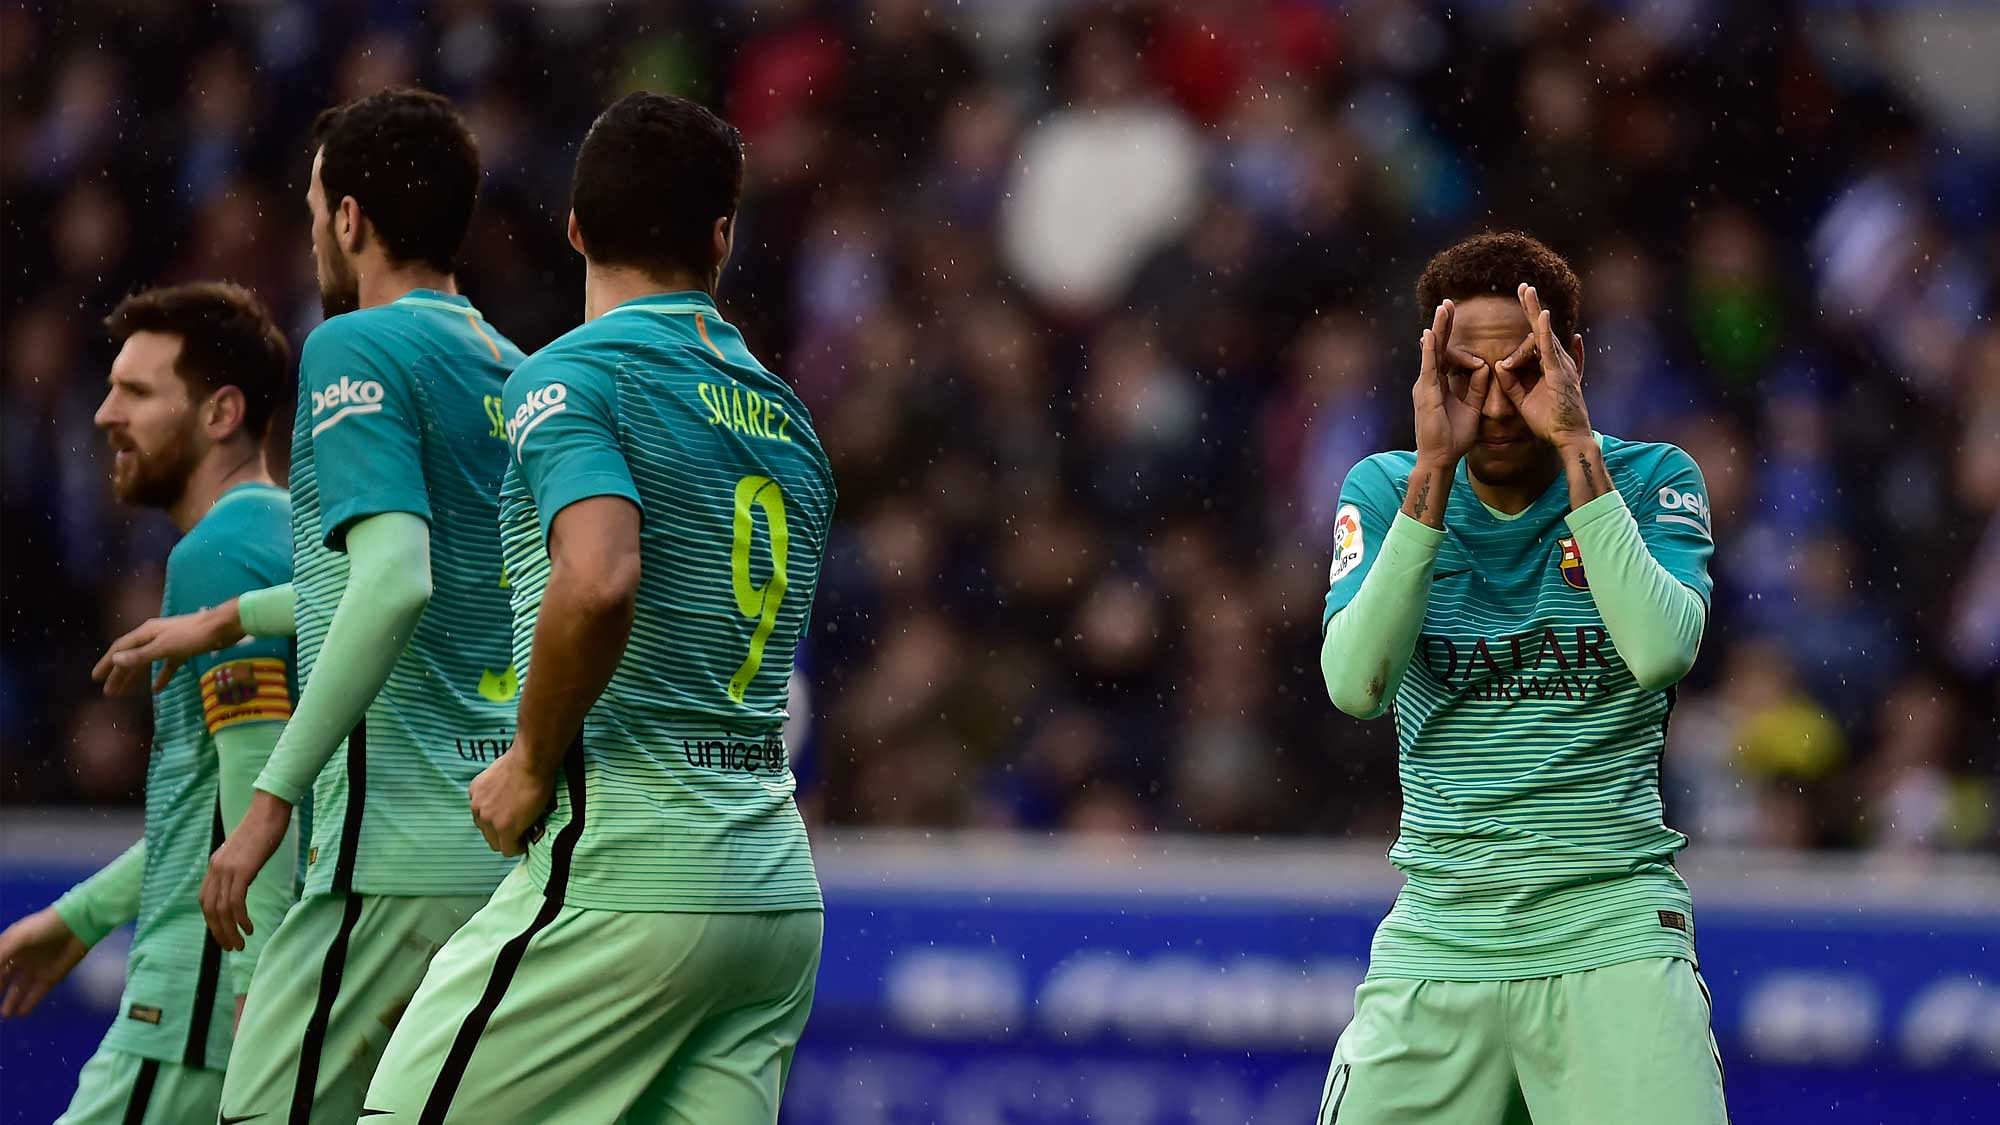 FC Barcelona’s Neymar Jr., right, celebrates his goal after scoring during the Spanish La Liga match between Barcelona and Deportivo Alaves. (Photo: AP)